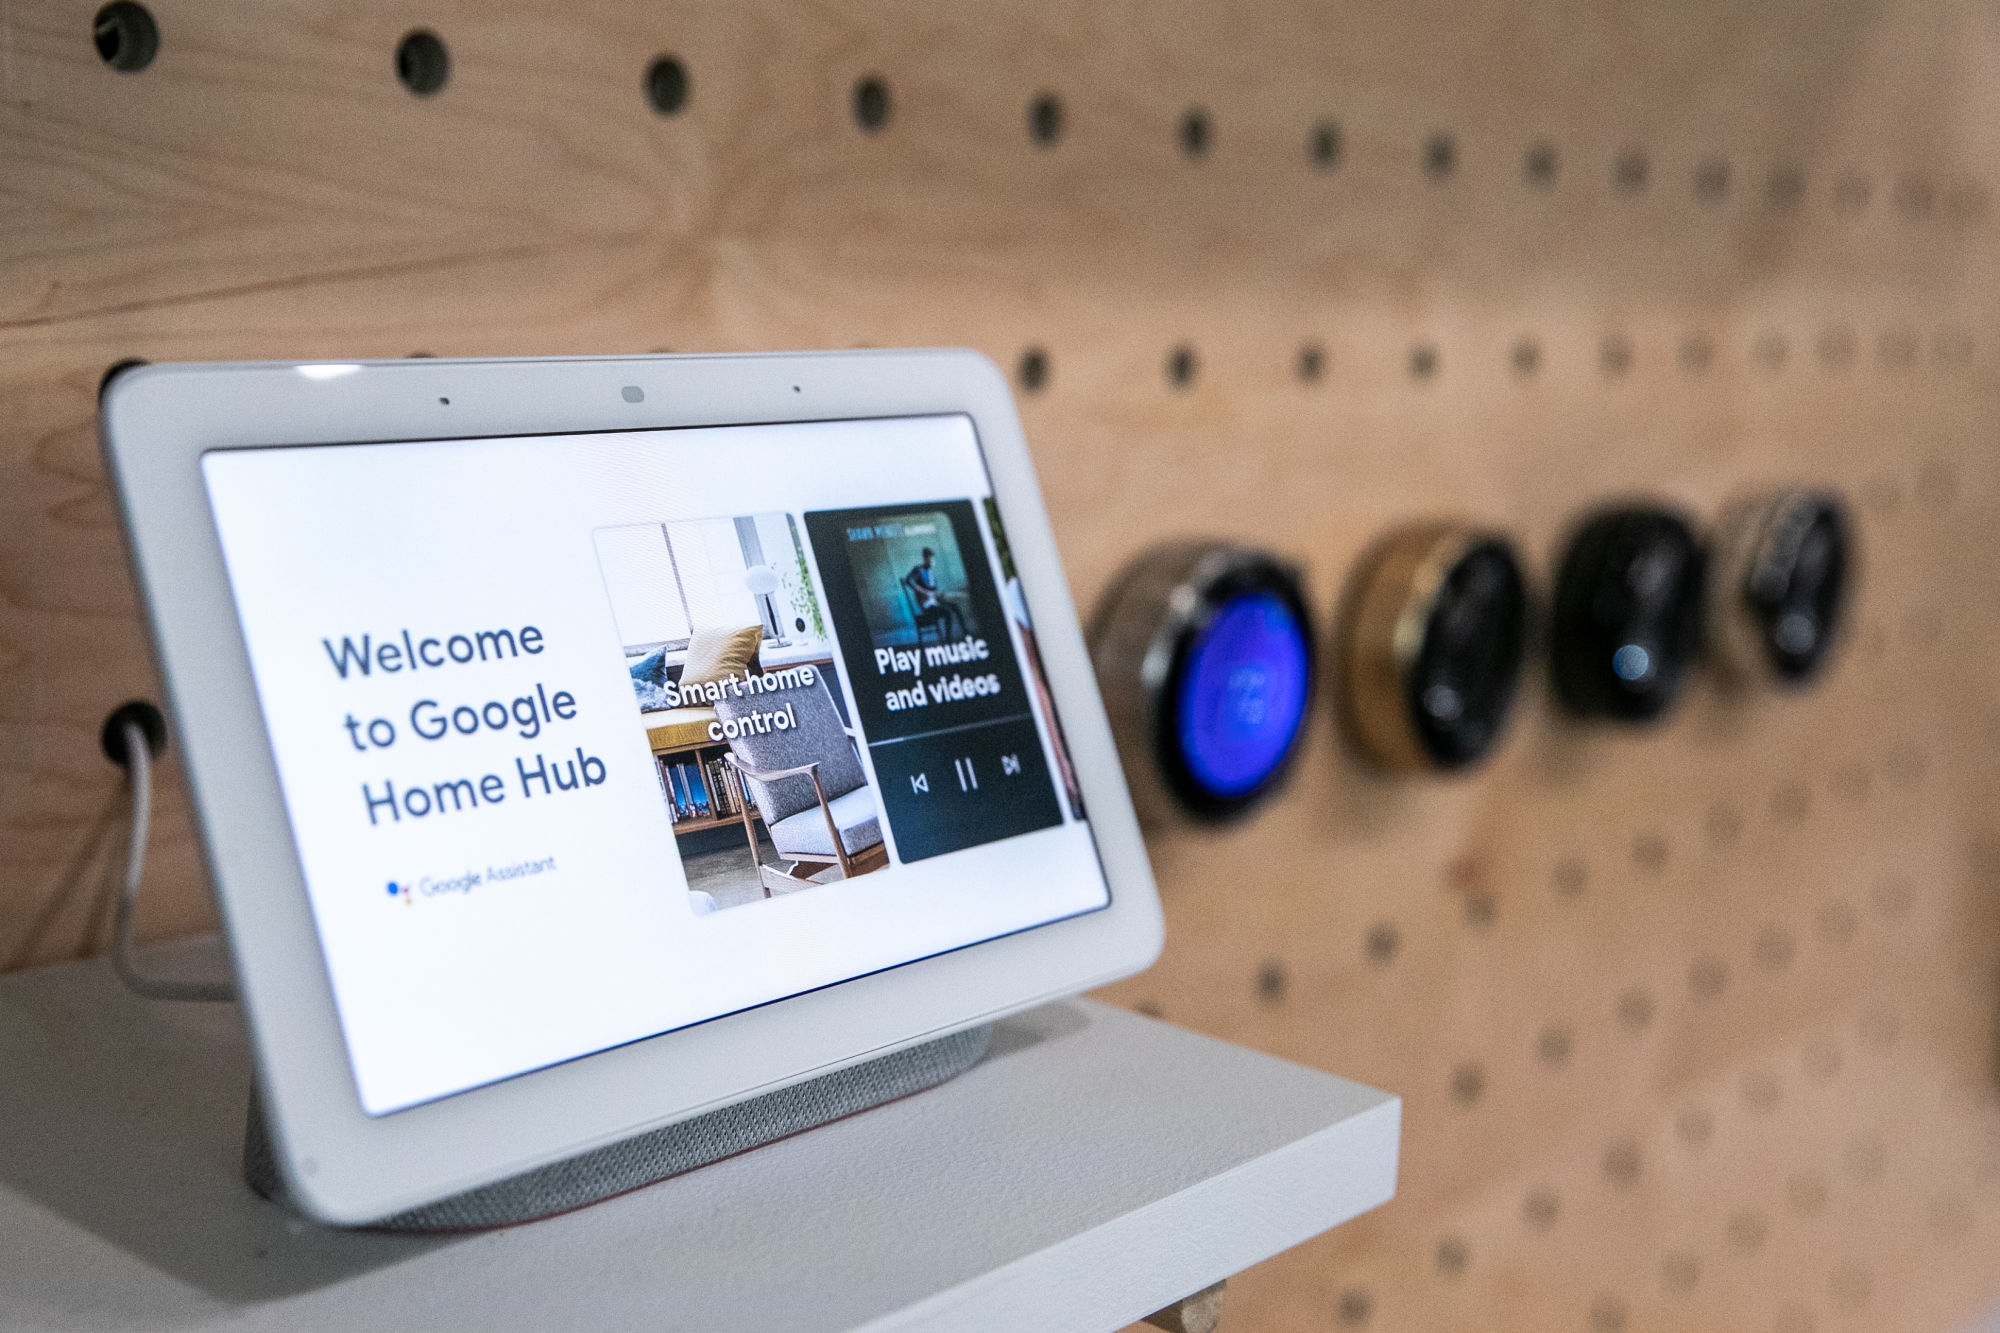 Google dismisses reported Home Hub security flaw | DeviceDaily.com